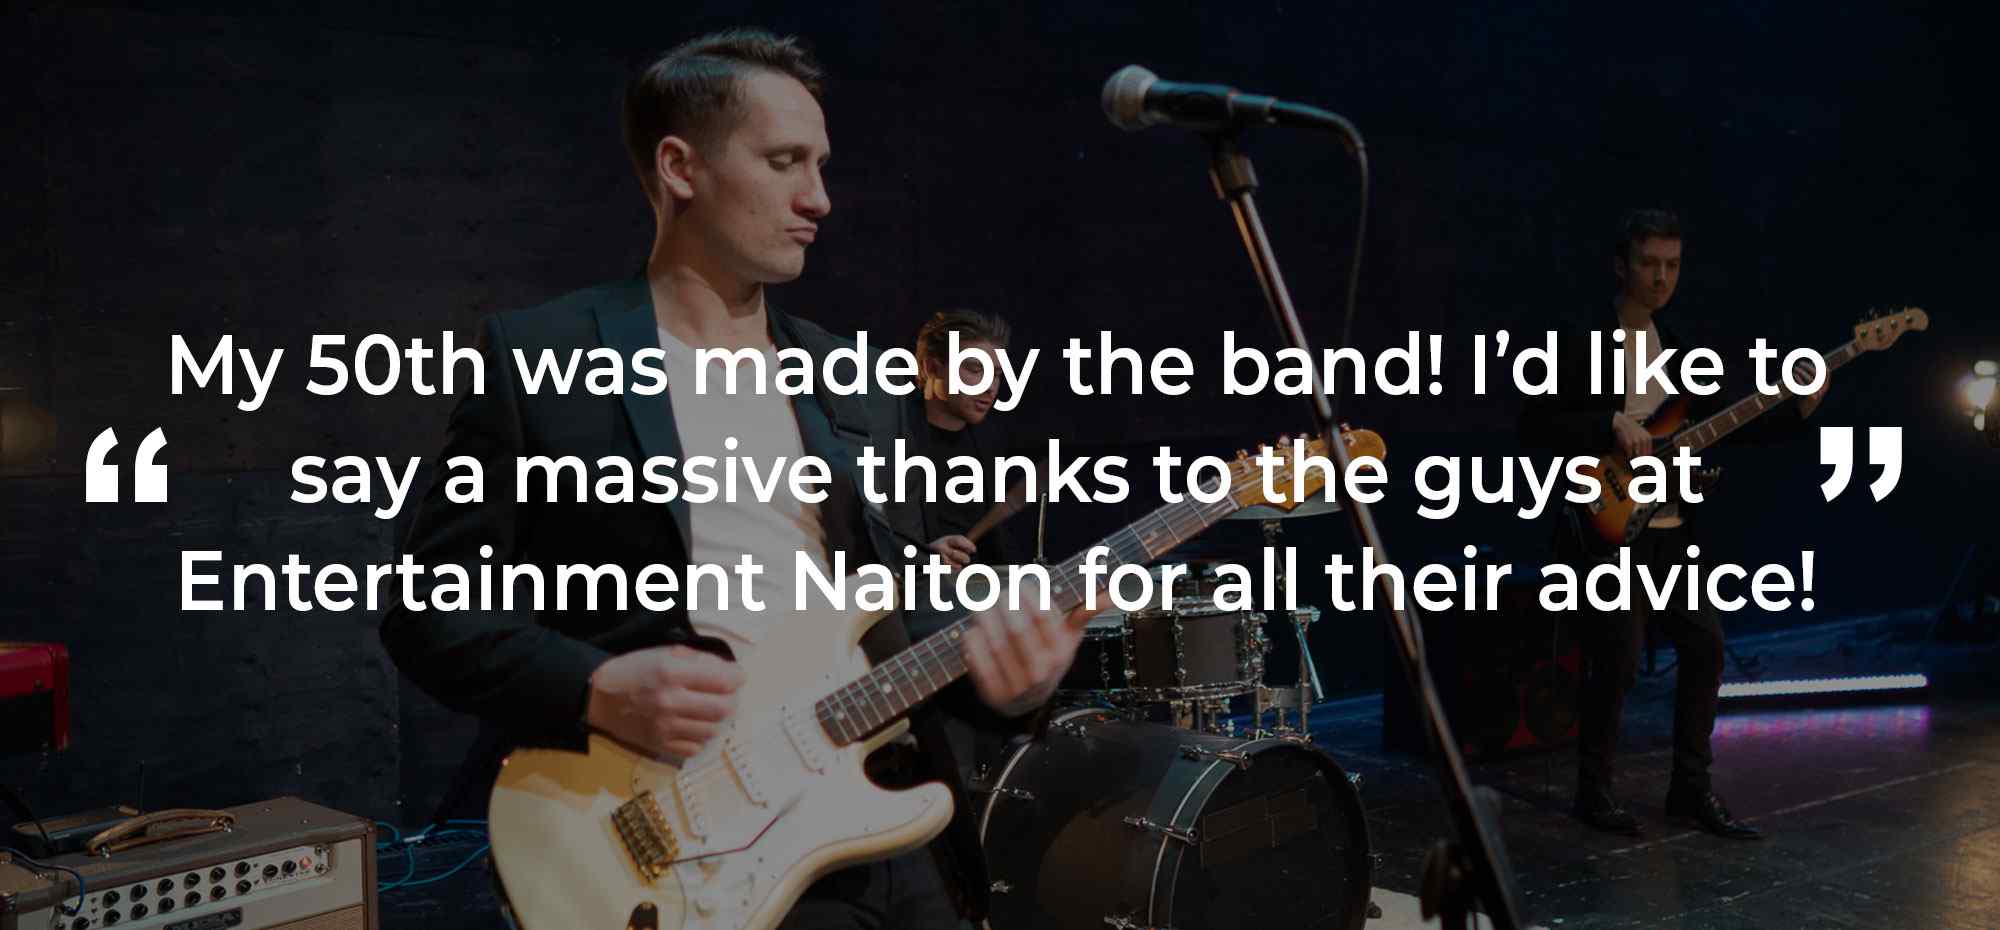 Client Review of a Party Band Pembrokeshire